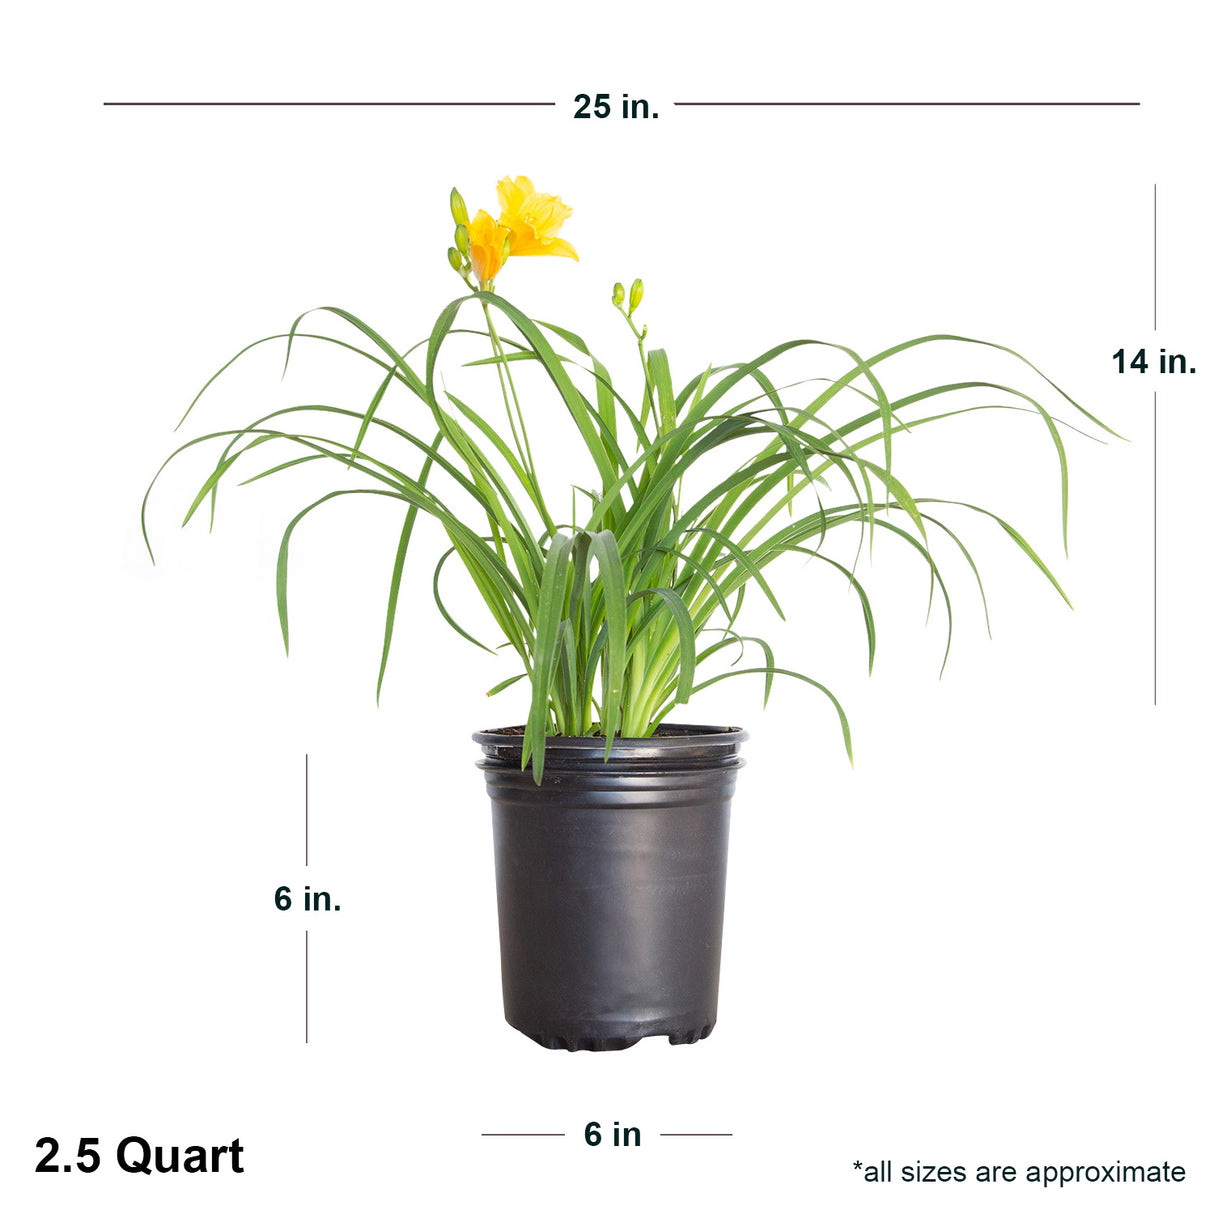 dimensions of the stella de oro daylily plant in a 2.5 quart black pot. Average dimensions are 25 inches wide by 14 inches tall.